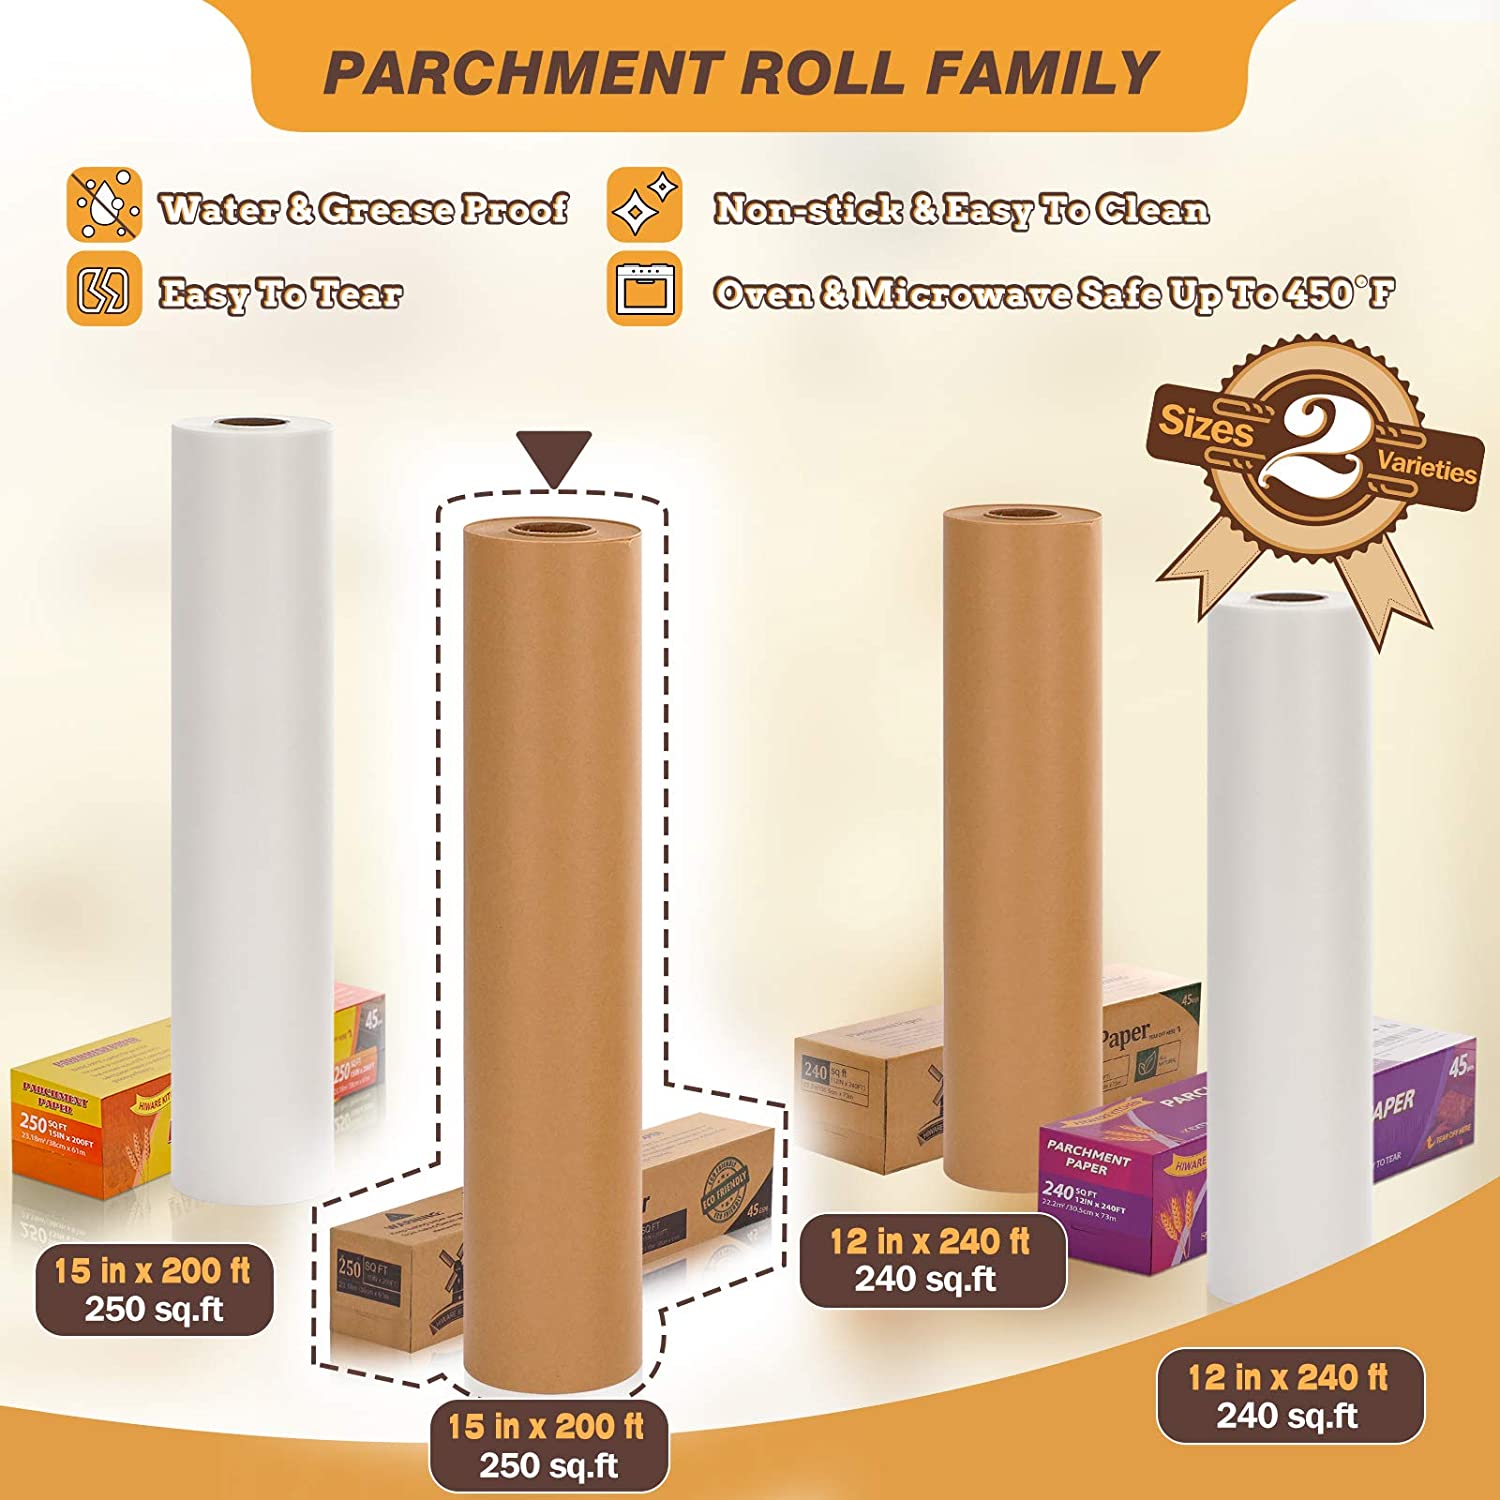 Unbleached Parchment Paper for Baking, 12 in x 240 ft, 240 Sq.ft, Baking  Paper, Non-Stick Parchment Paper Roll for Baking, Cooking, Grilling, Air